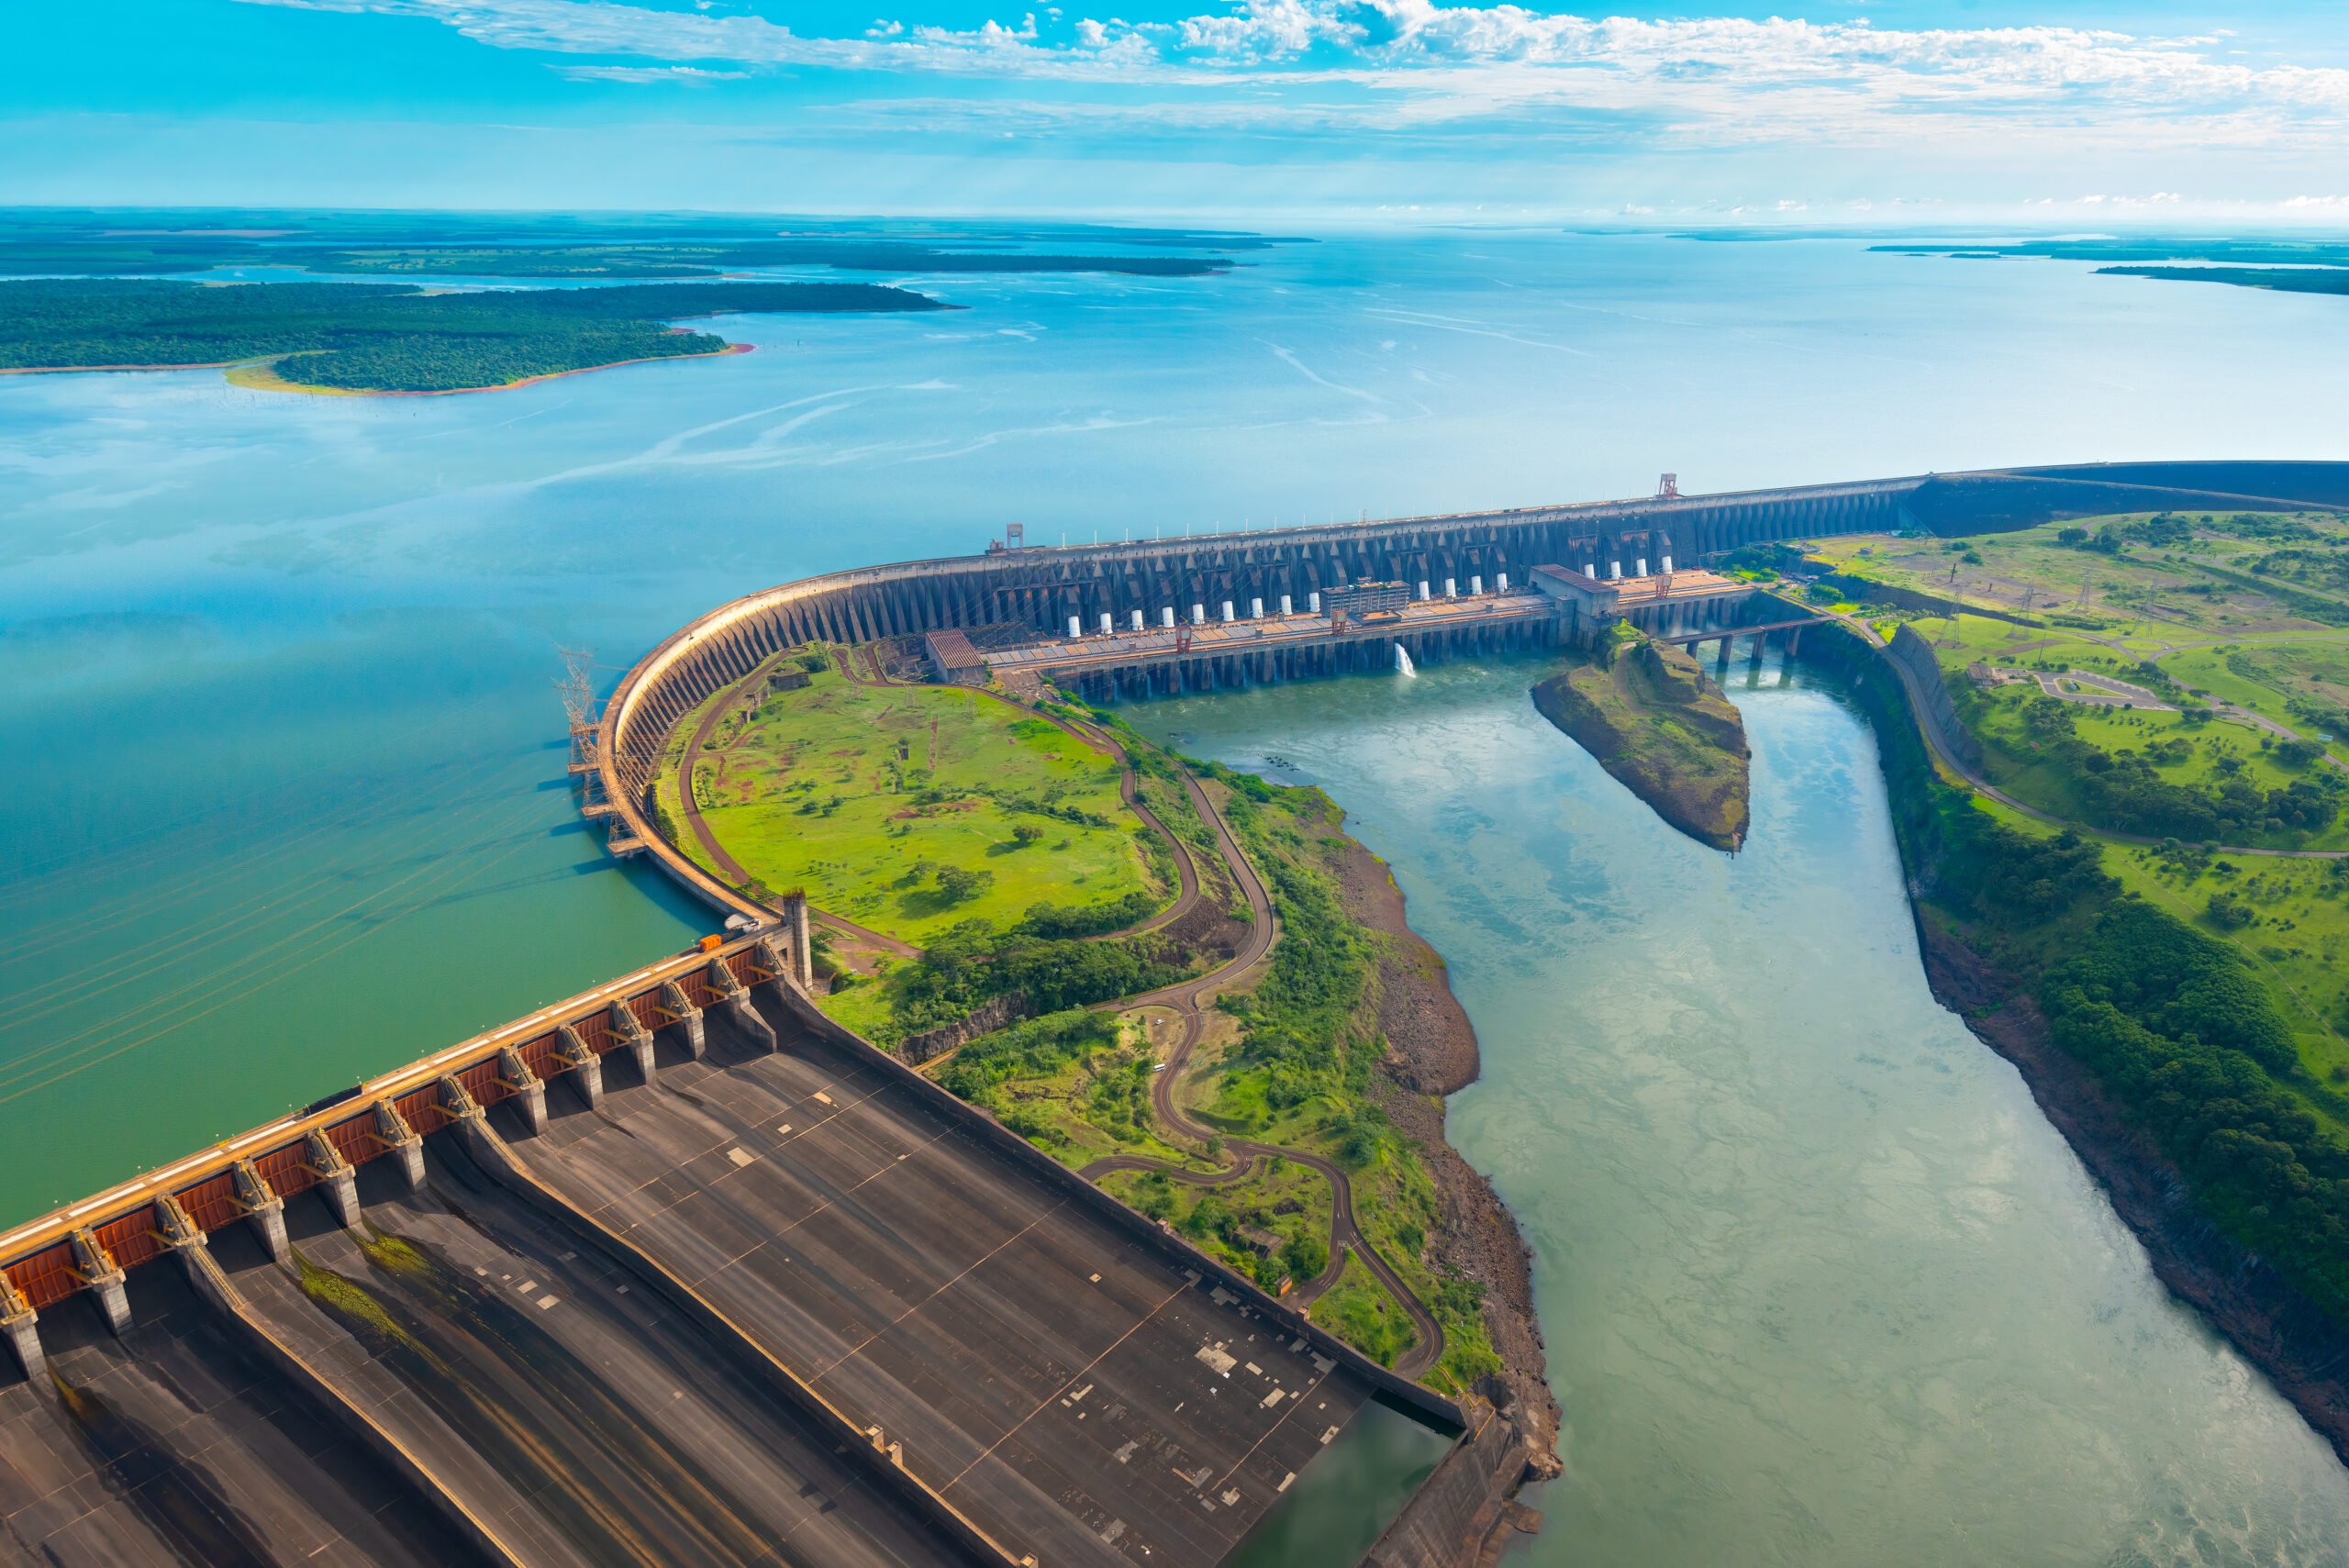 Located along the Brazil-Paraguay border on the Parana River, Itaipu Dam is the world's third largest hydroelectric dam.